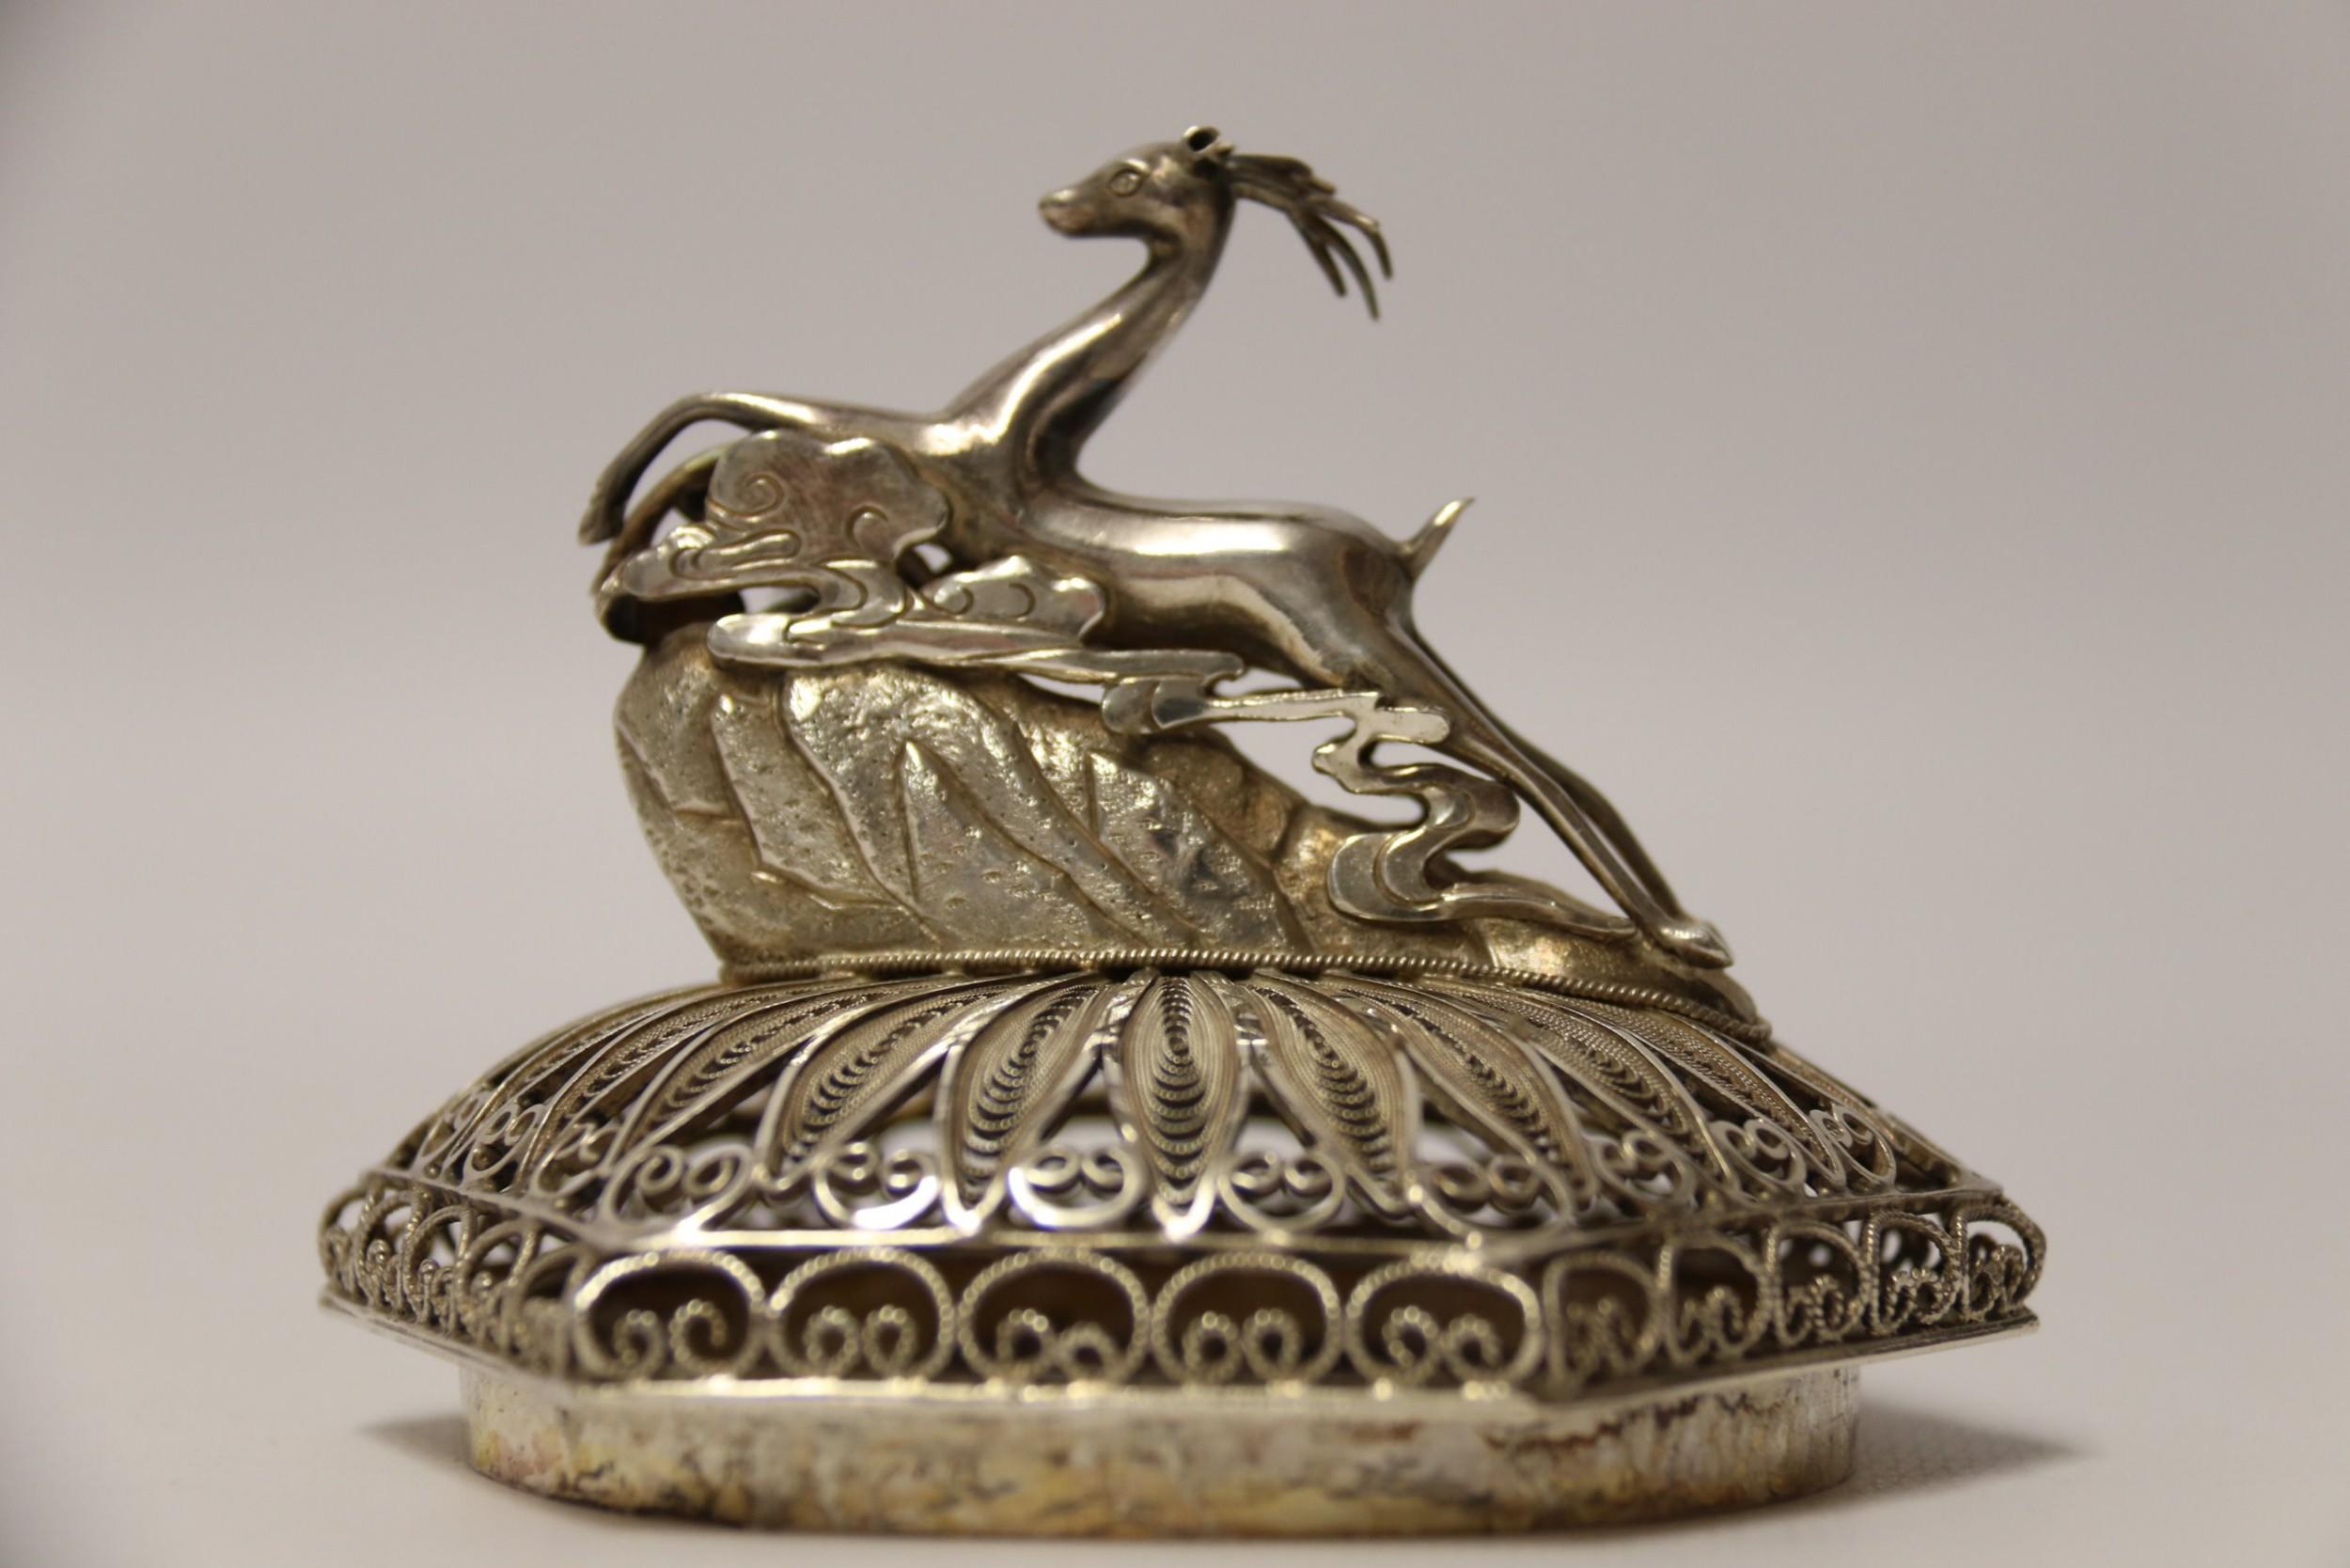 19th Century Indian Silver Filigree Work Incense Burner with Mounted Cabochons For Sale 13